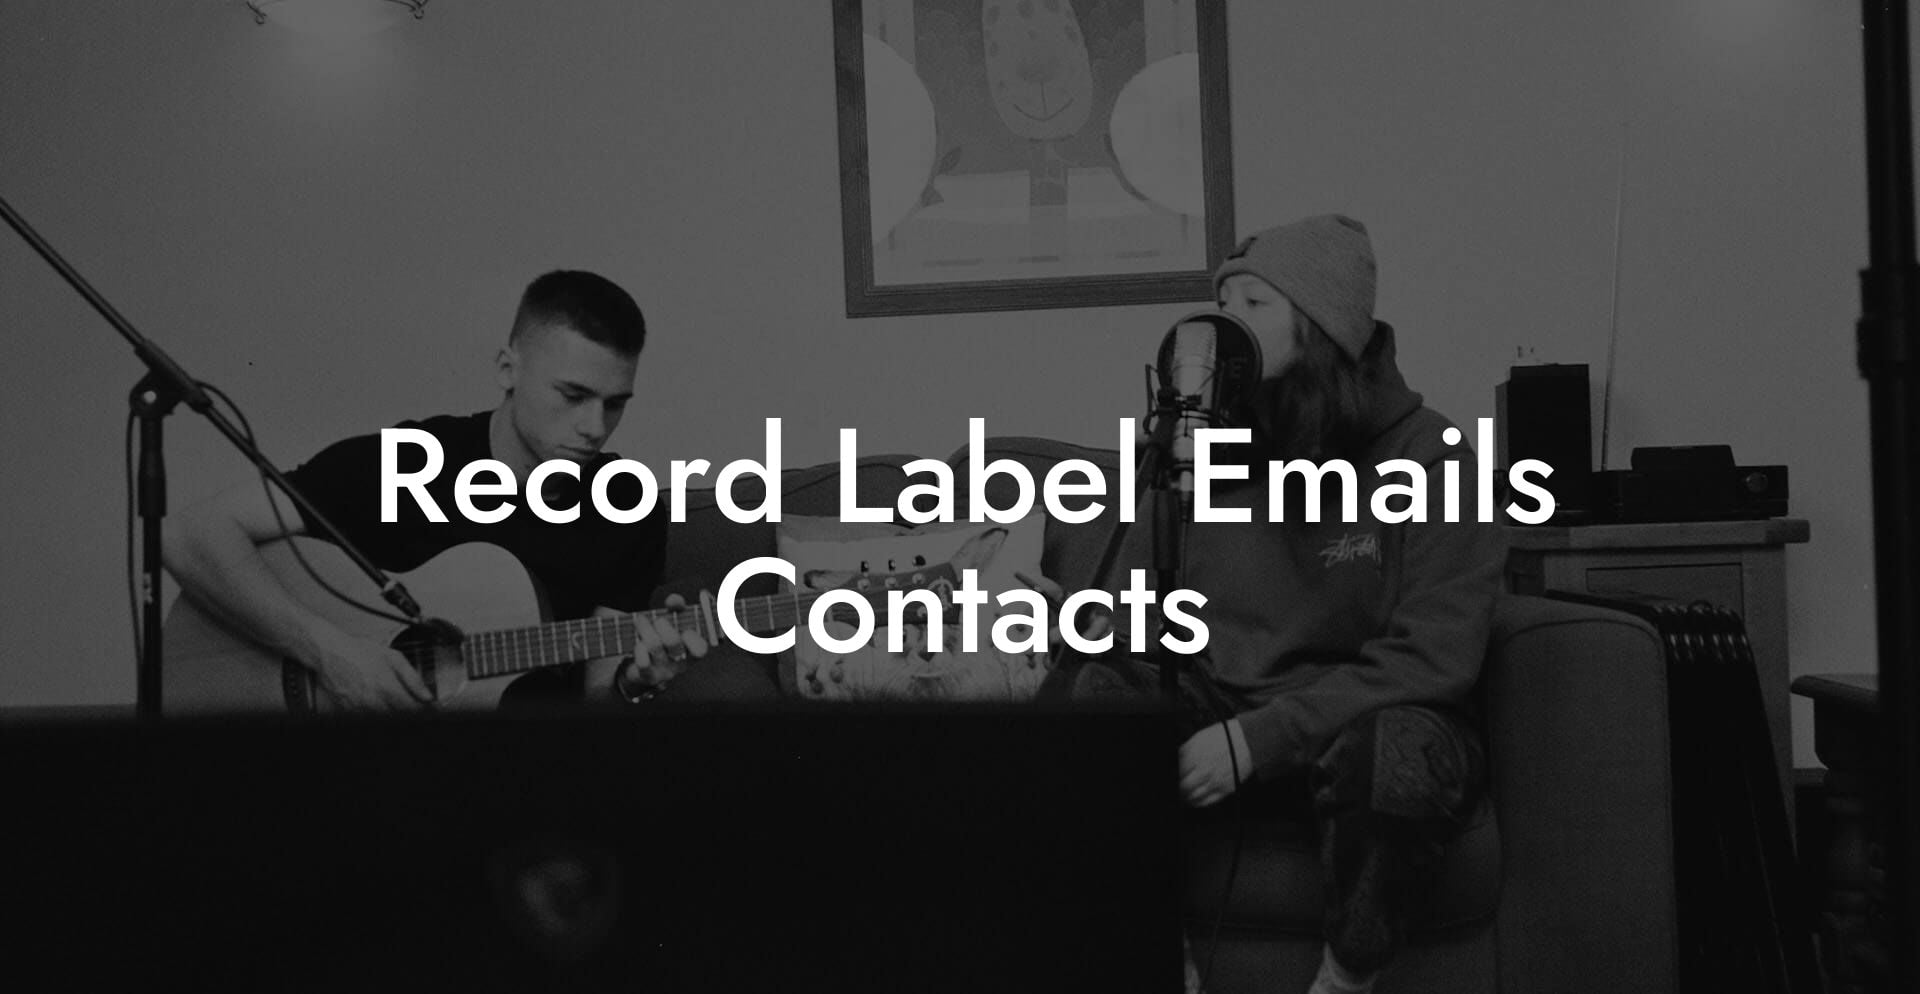 Record Label Emails Contacts